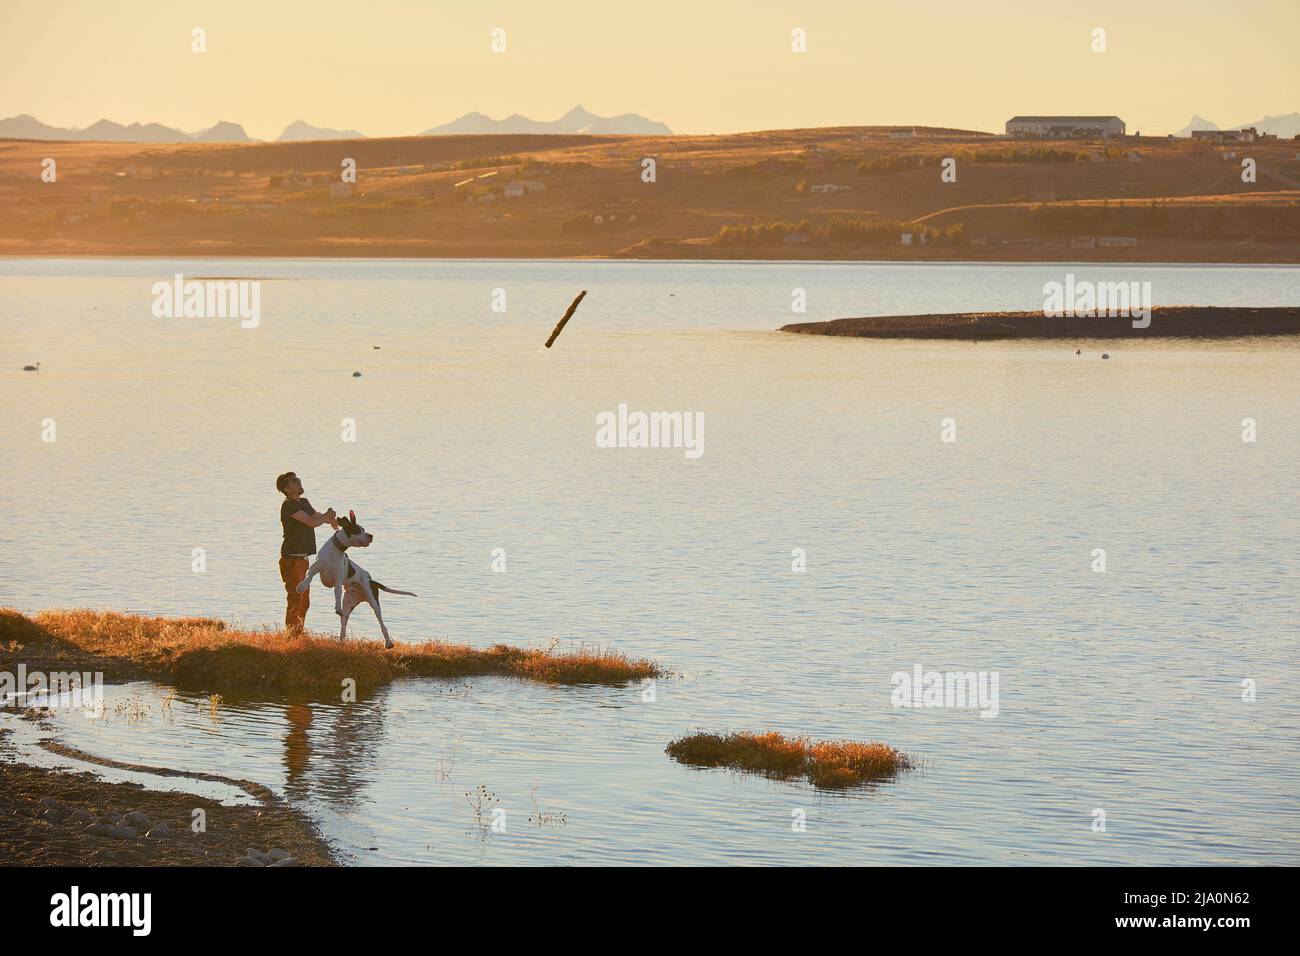 A guy plays with his dog on Lake Argentino at sunset, El Calafate, Patagonia, Argentina. Stock Photo